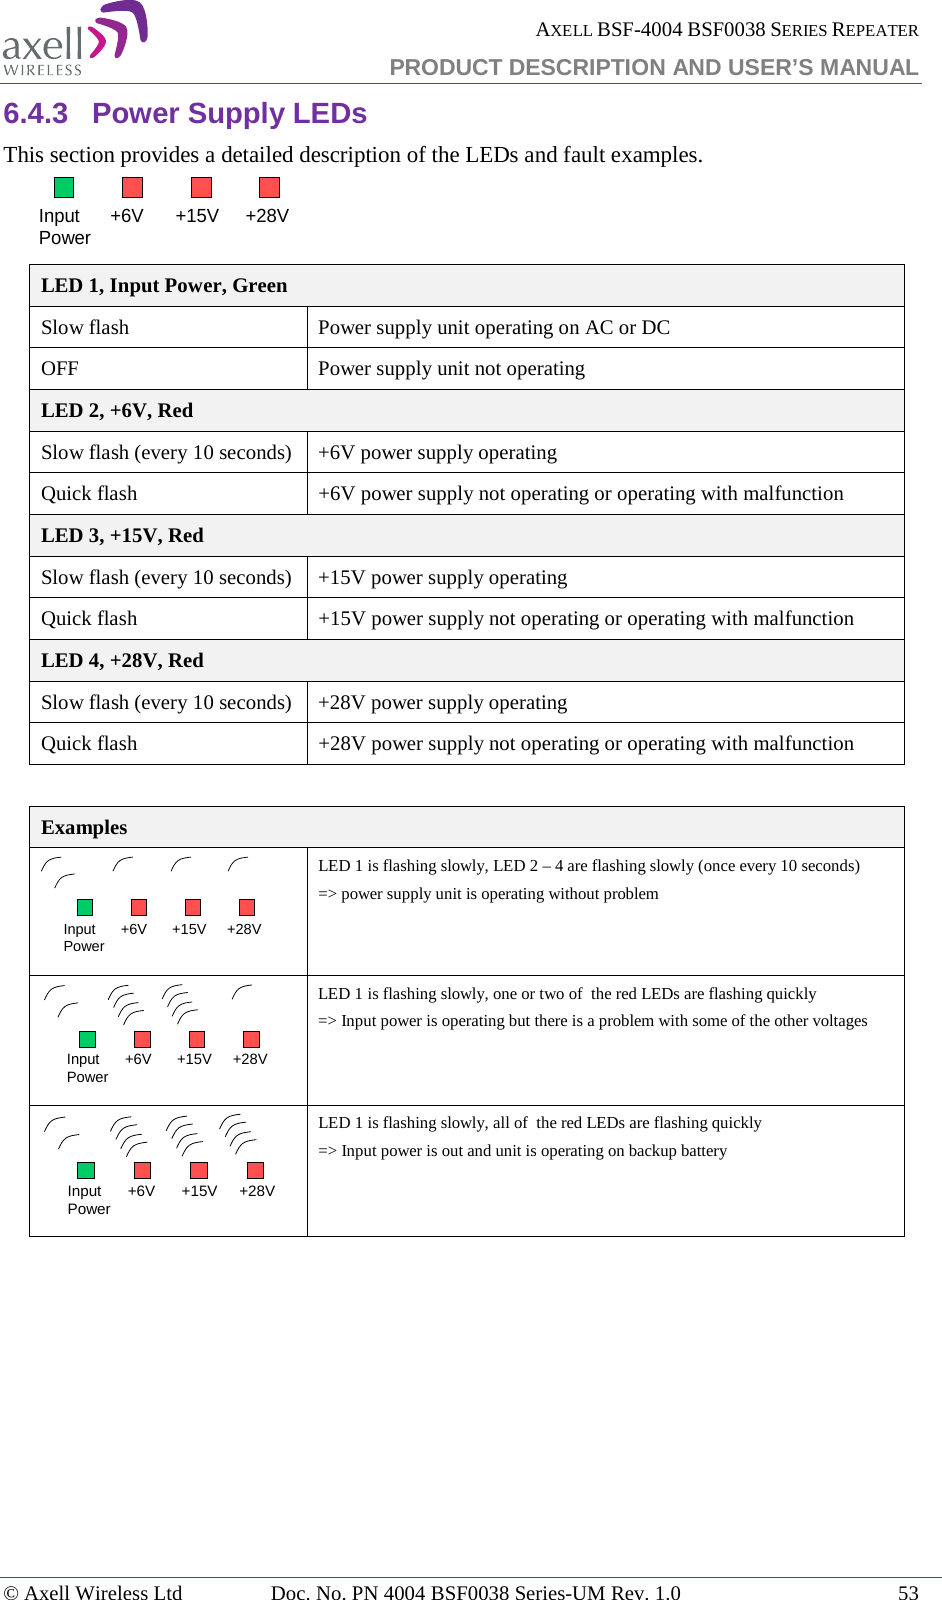  AXELL BSF-4004 BSF0038 SERIES REPEATER PRODUCT DESCRIPTION AND USER’S MANUAL  6.4.3 Power Supply LEDs This section provides a detailed description of the LEDs and fault examples.  LED 1, Input Power, Green  Slow flash Power supply unit operating on AC or DC OFF Power supply unit not operating LED 2, +6V, Red Slow flash (every 10 seconds) +6V power supply operating Quick flash +6V power supply not operating or operating with malfunction LED 3, +15V, Red  Slow flash (every 10 seconds) +15V power supply operating Quick flash +15V power supply not operating or operating with malfunction LED 4, +28V, Red Slow flash (every 10 seconds) +28V power supply operating Quick flash +28V power supply not operating or operating with malfunction  Examples  LED 1 is flashing slowly, LED 2 – 4 are flashing slowly (once every 10 seconds) =&gt; power supply unit is operating without problem  LED 1 is flashing slowly, one or two of  the red LEDs are flashing quickly =&gt; Input power is operating but there is a problem with some of the other voltages  LED 1 is flashing slowly, all of  the red LEDs are flashing quickly =&gt; Input power is out and unit is operating on backup battery     Input Power +6V +15V +28VInput Power +6V +15V +28VInput Power +6V +15V +28VInput Power +6V +15V +28V© Axell Wireless Ltd Doc. No. PN 4004 BSF0038 Series-UM Rev. 1.0 53 